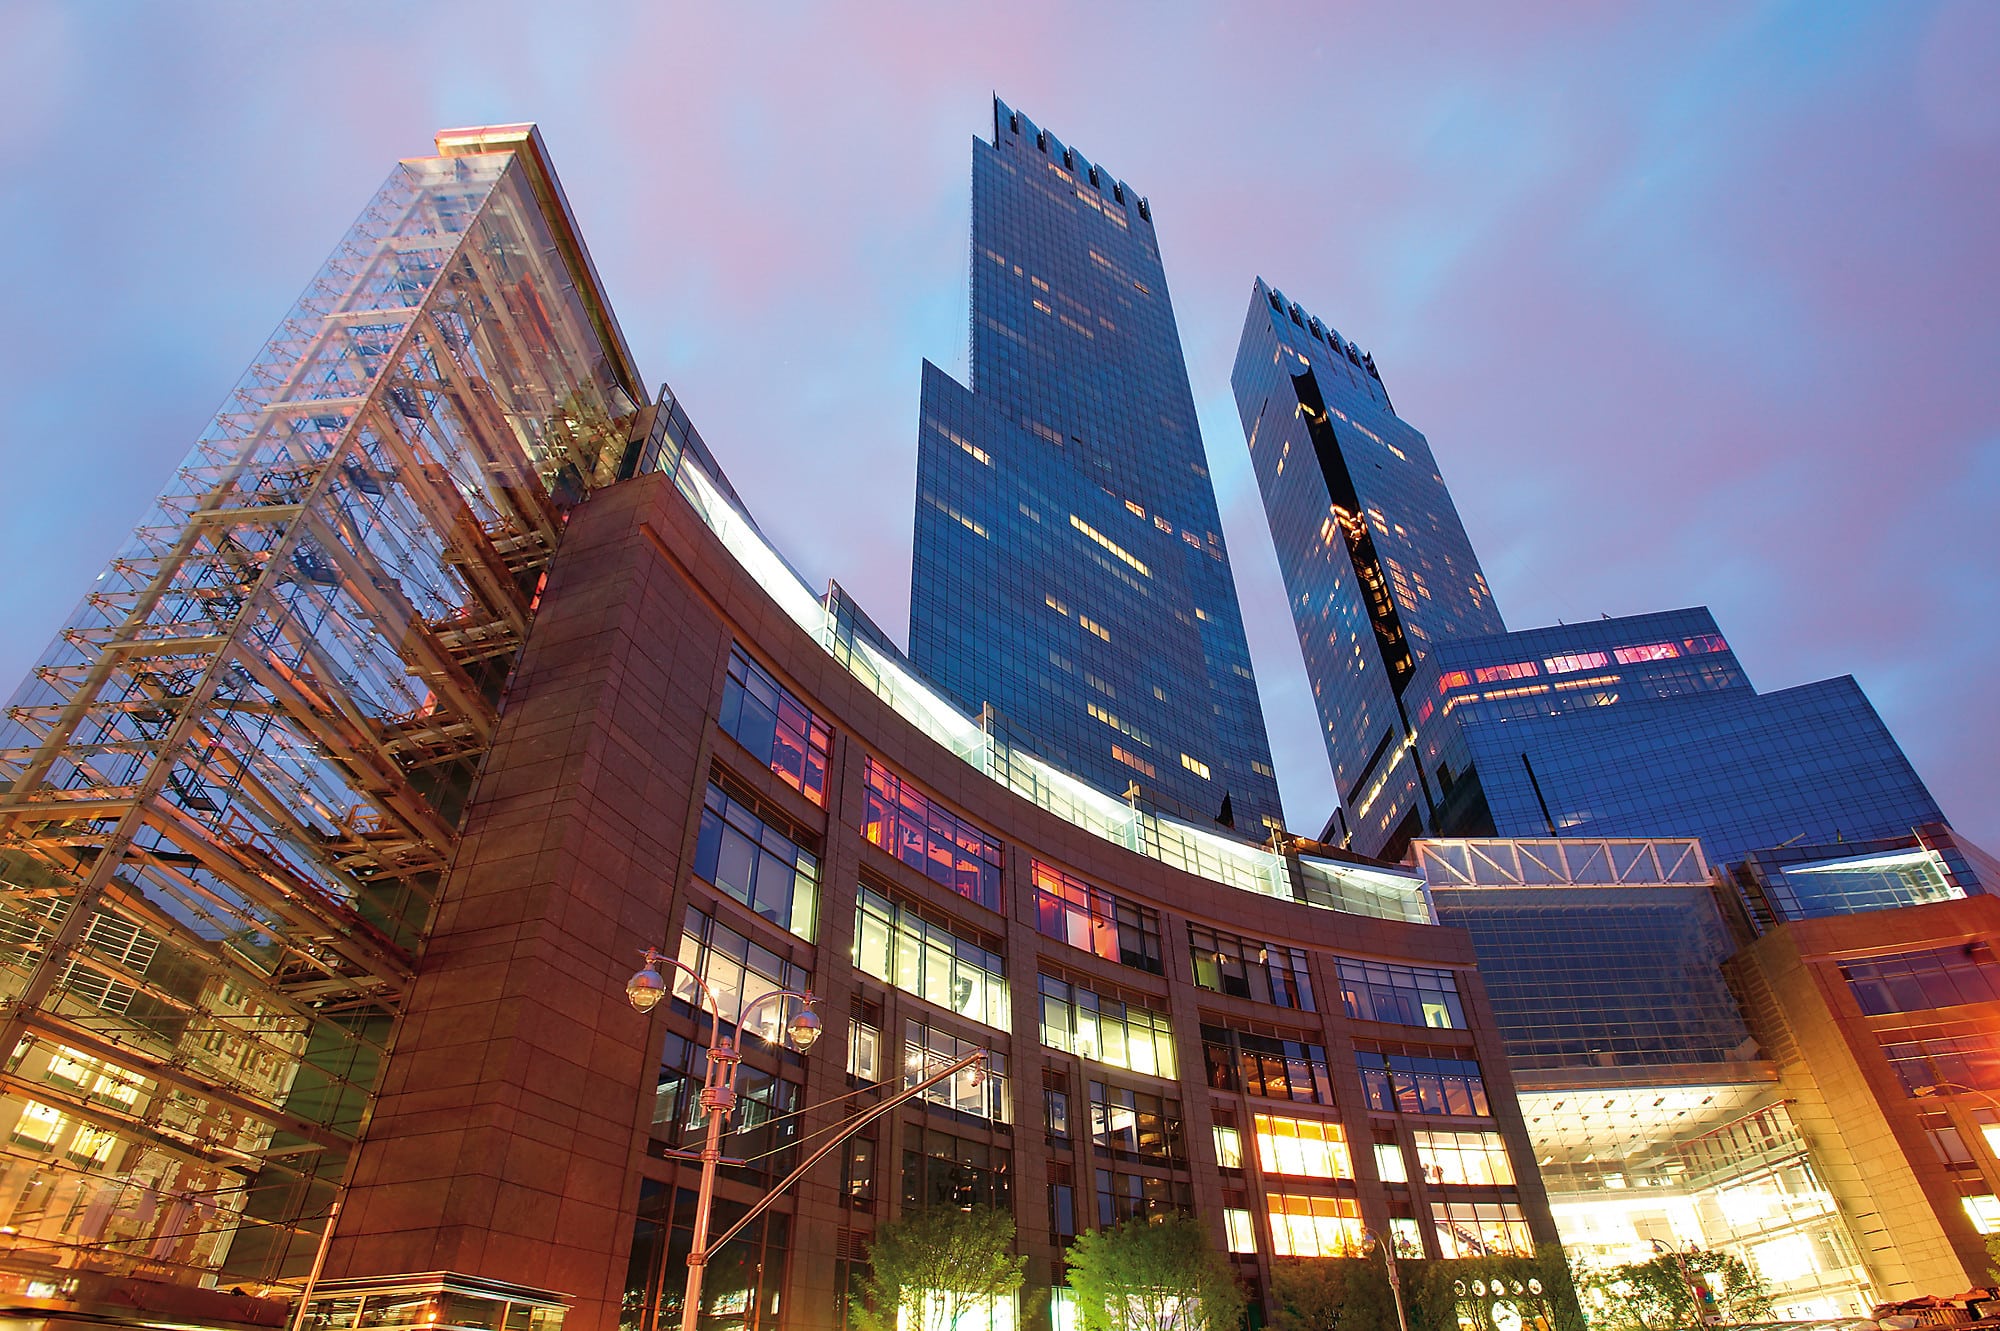 The exterior of the Time Warner Center which hosts Mandarin Oriental, one of the five star luxury hotels in New York City.